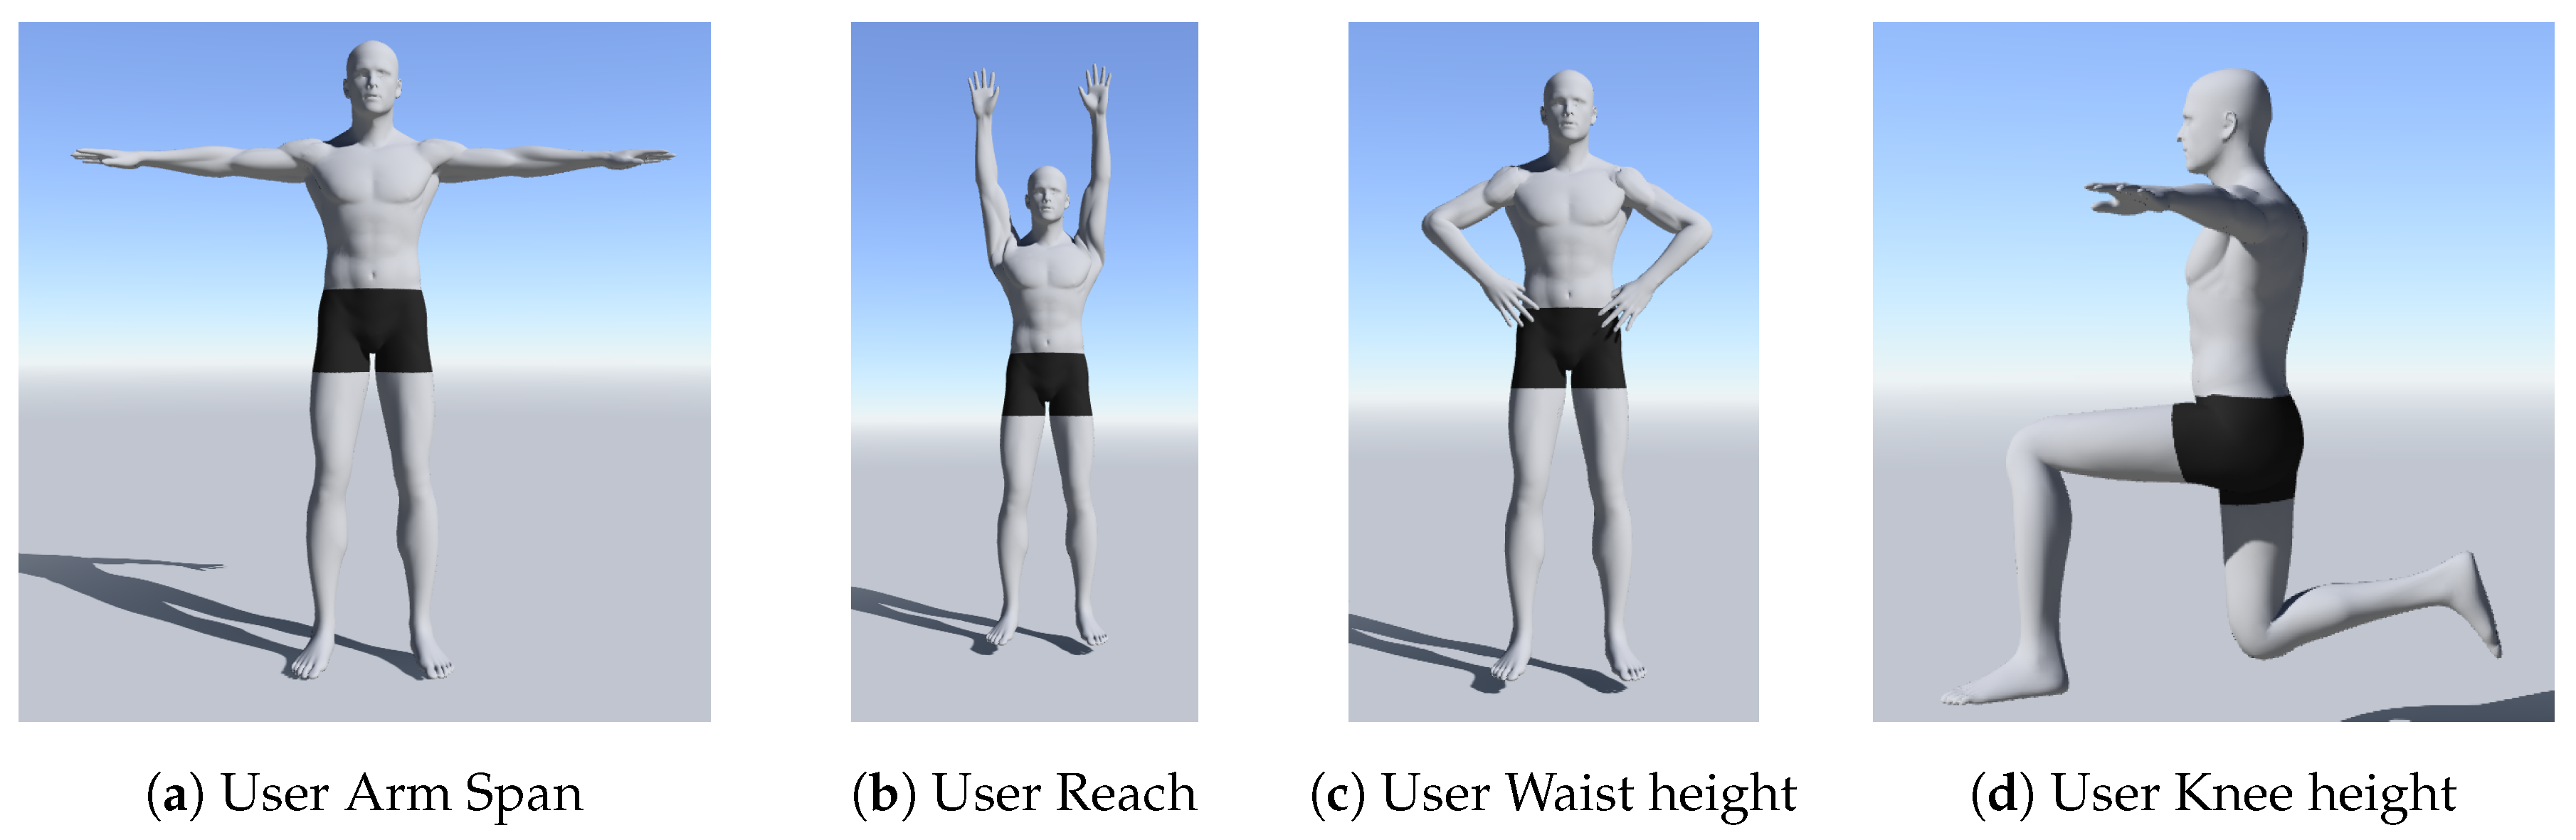 Sensors | Free Full-Text | BioMove: Biometric User Identification from  Human Kinesiological Movements for Virtual Reality Systems | HTML